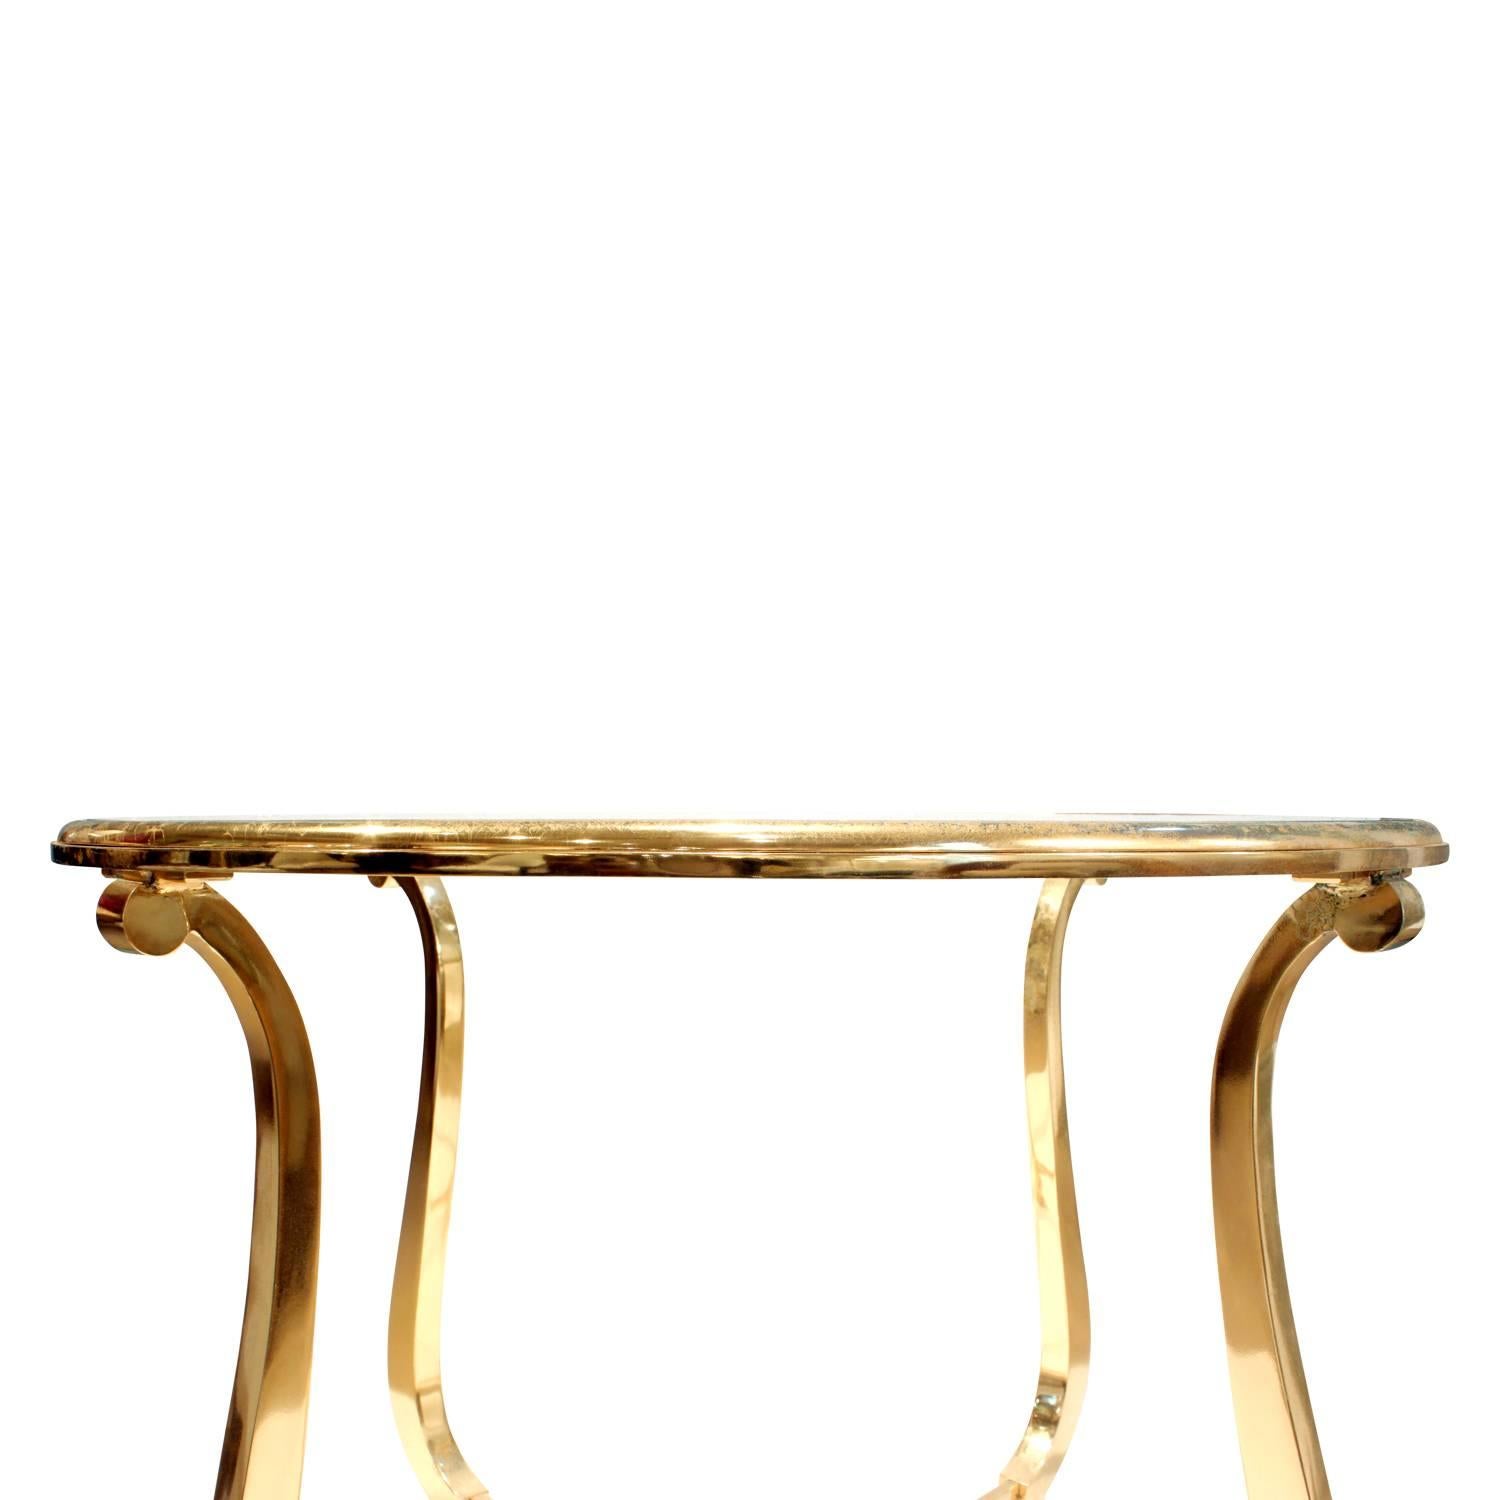 Modern Paul M. Jones Sculptural Side Table in Polished Gold Plated, 1969